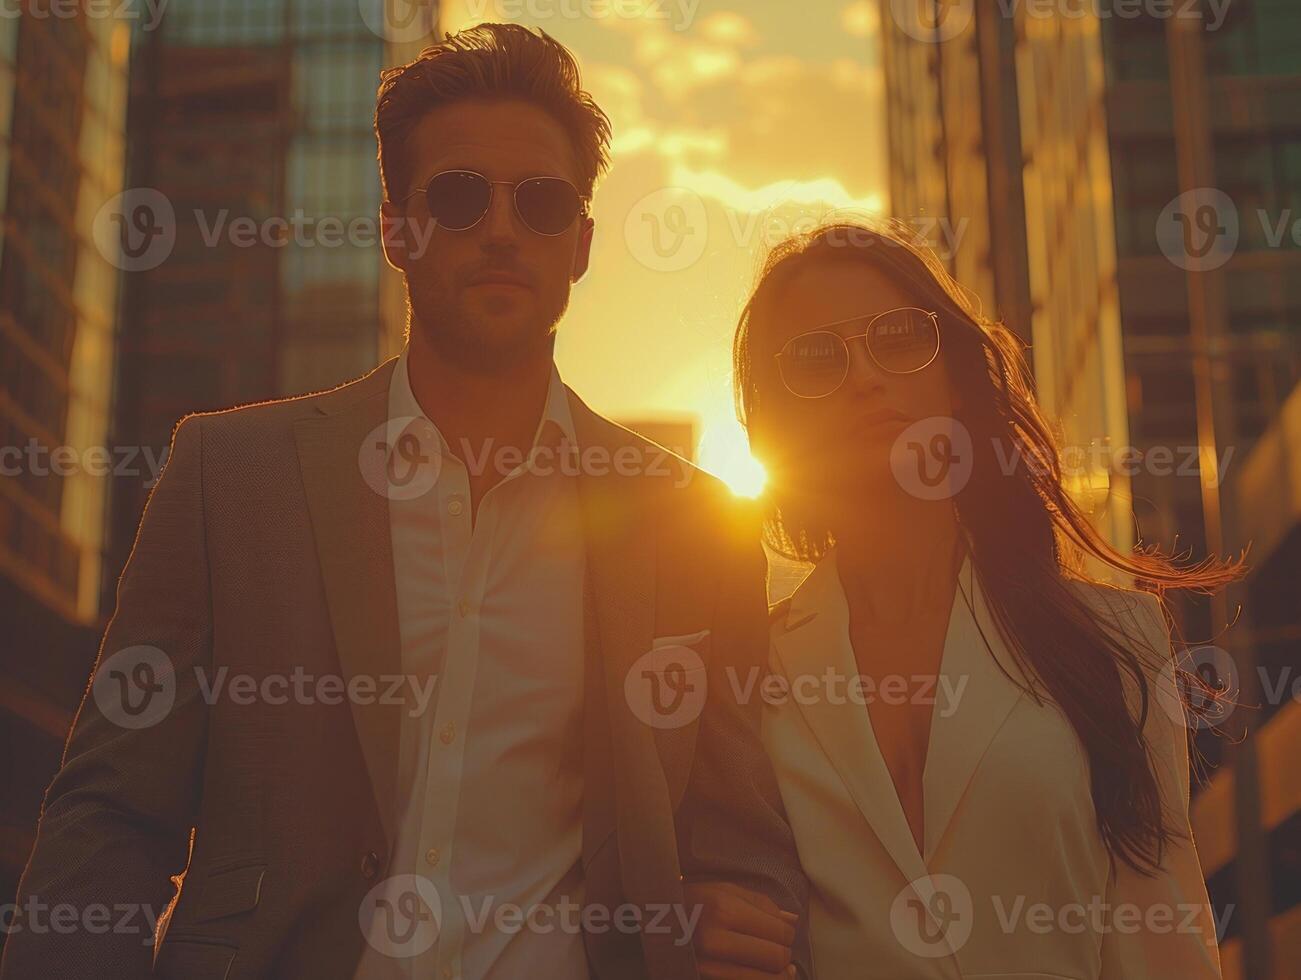 Man and woman walking together on street during sunset photo